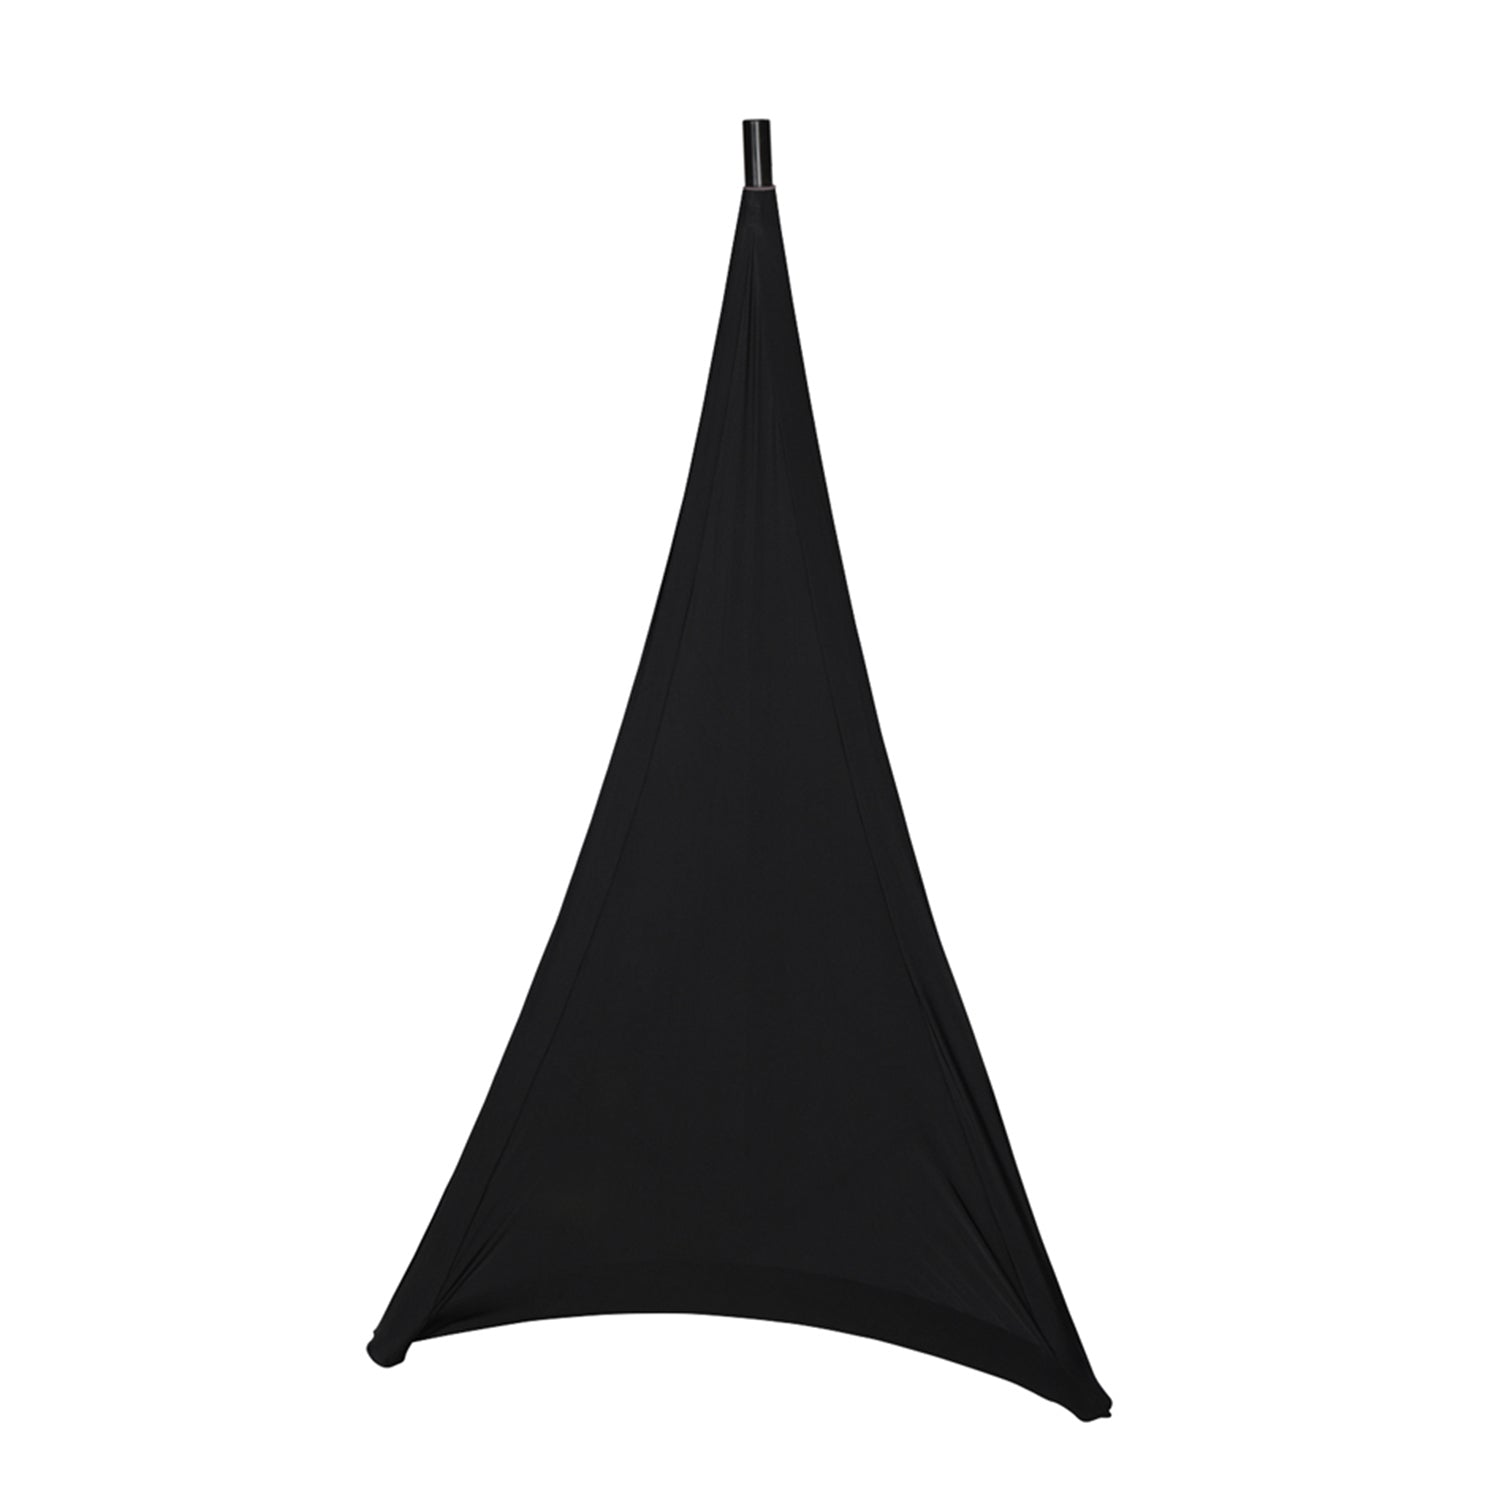 JBL Bags STAND-STRETCH-COVER-BK-1 Stretchy Black Tripod Stand Cover - 1 Side - Hollywood DJ